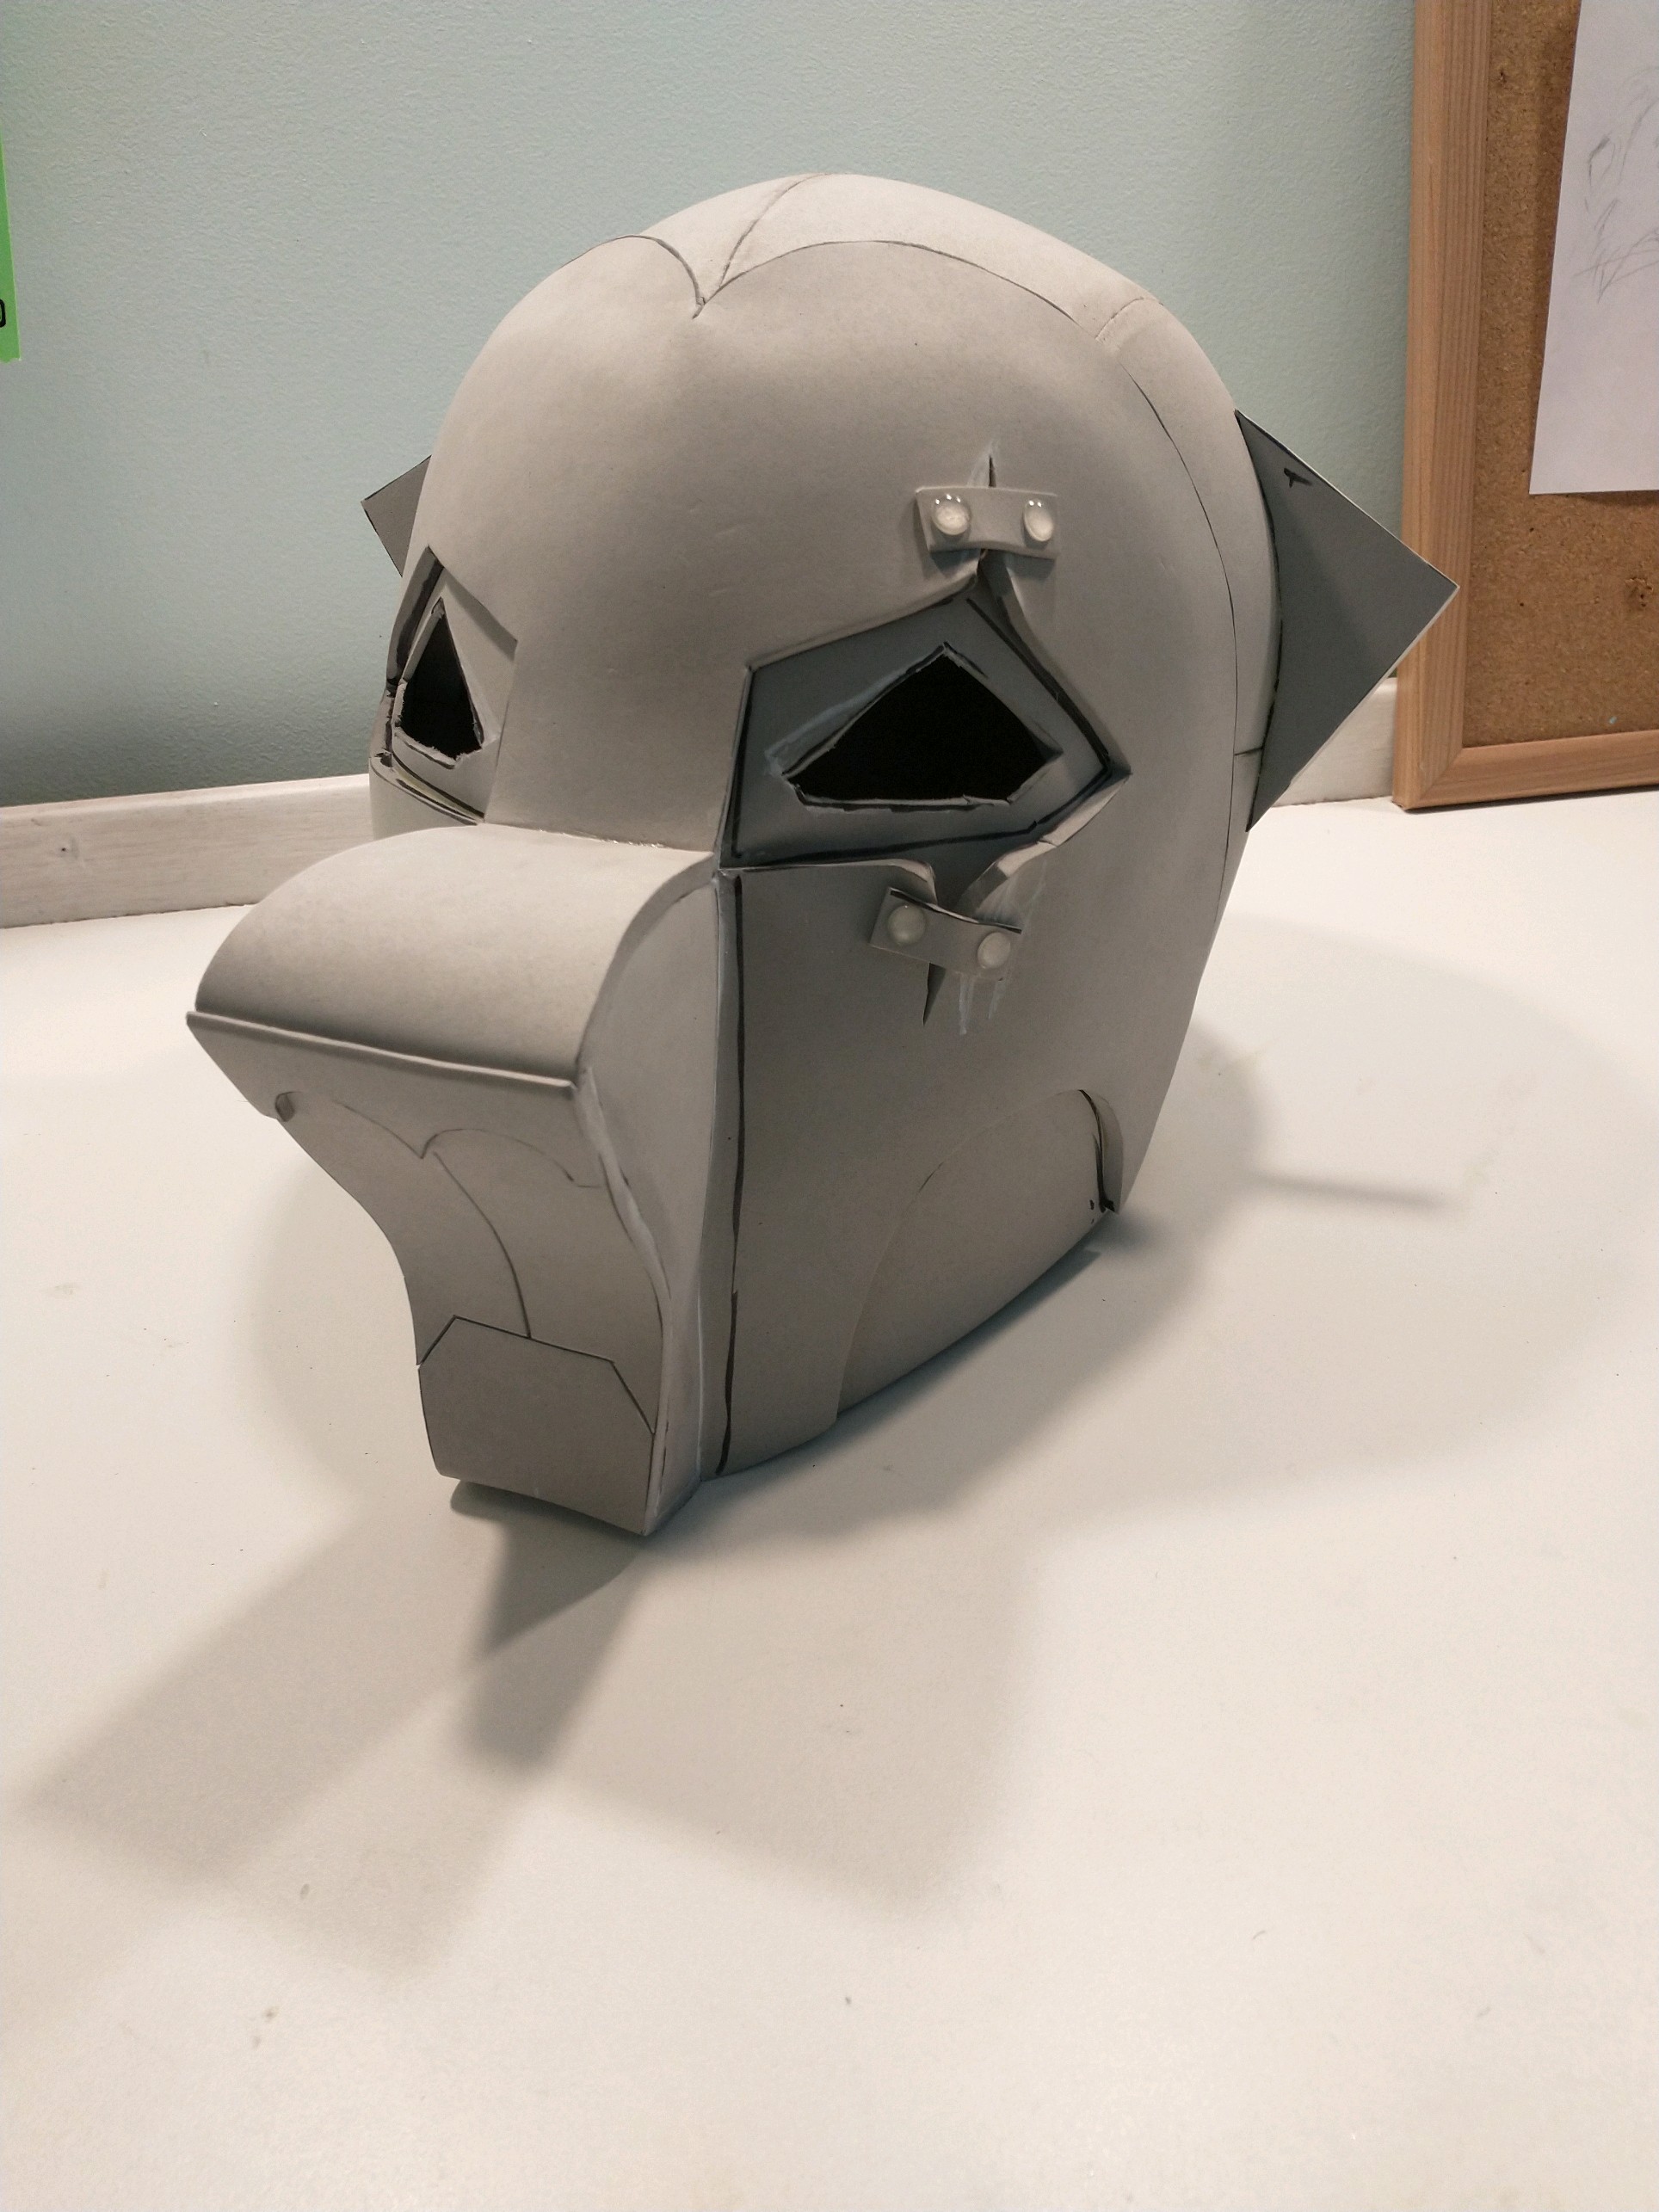 Helmet - muzzle completed and scar added.